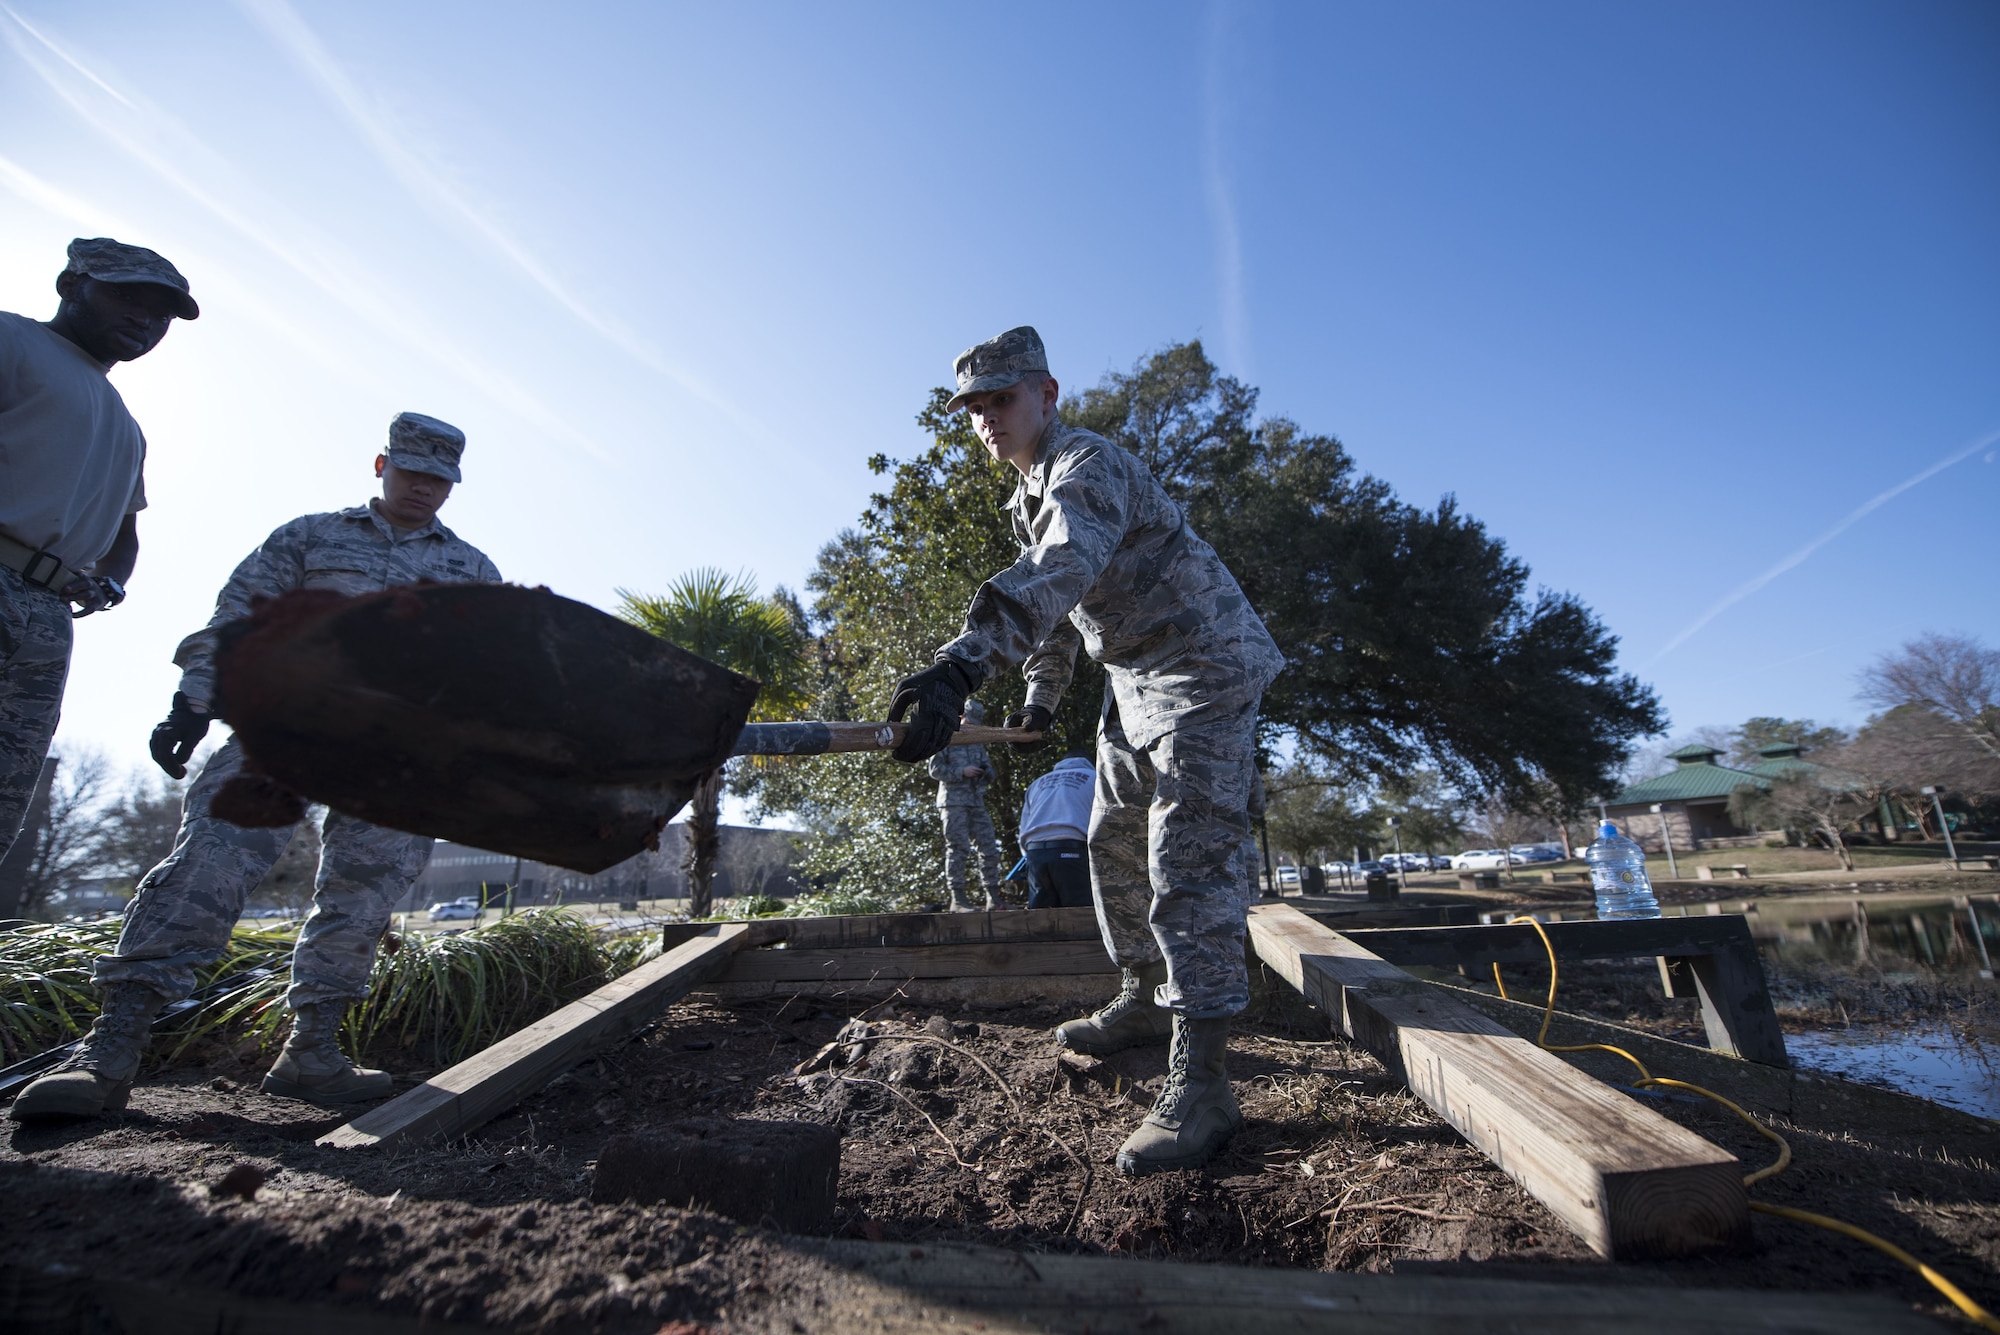 U.S. Air Force 2nd Lt. Stone Williford, 20th Civil Engineer Squadron real property specialist, removes dirt to level the ground at Shaw Air Force Base, S.C., Feb. 6, 2018.